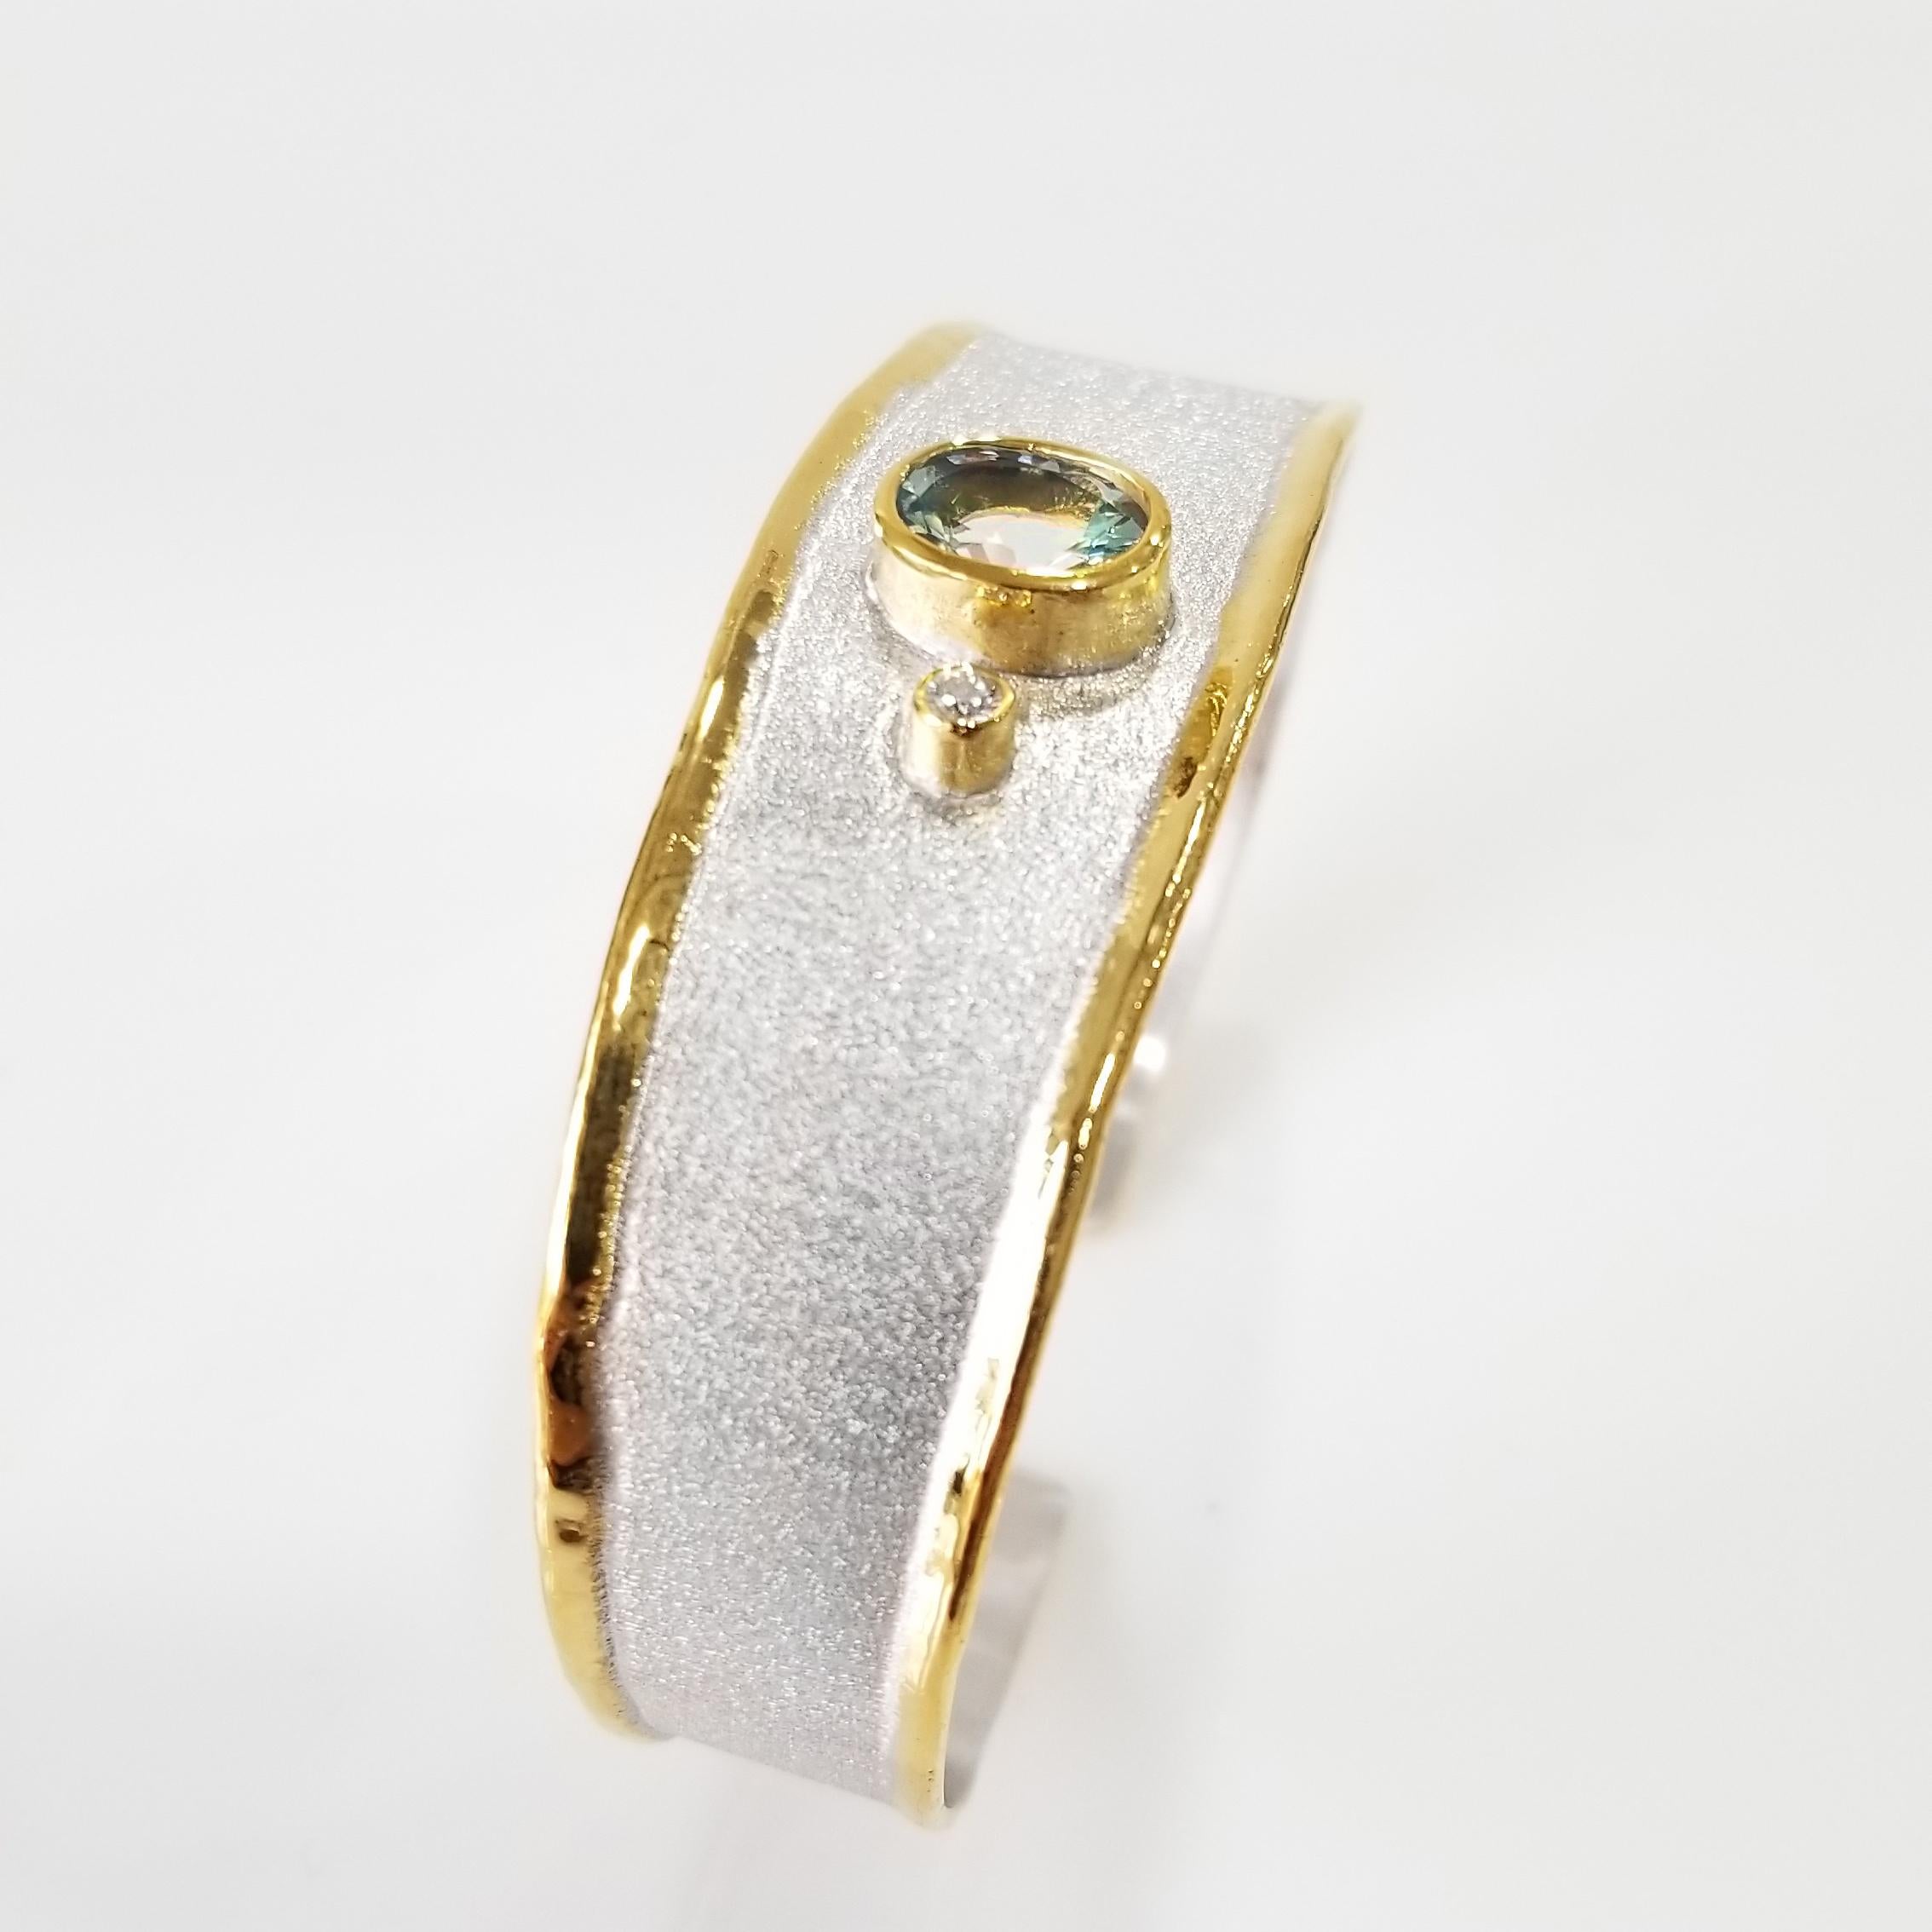 Yianni Creations bangle bracelet from Midas Collection all handcrafted from fine silver 950 purity and plated with palladium to resist the elements. This gorgeous artisan bracelet features 1.10 Carat oval shape aquamarine accompanied by 0.03 Carat